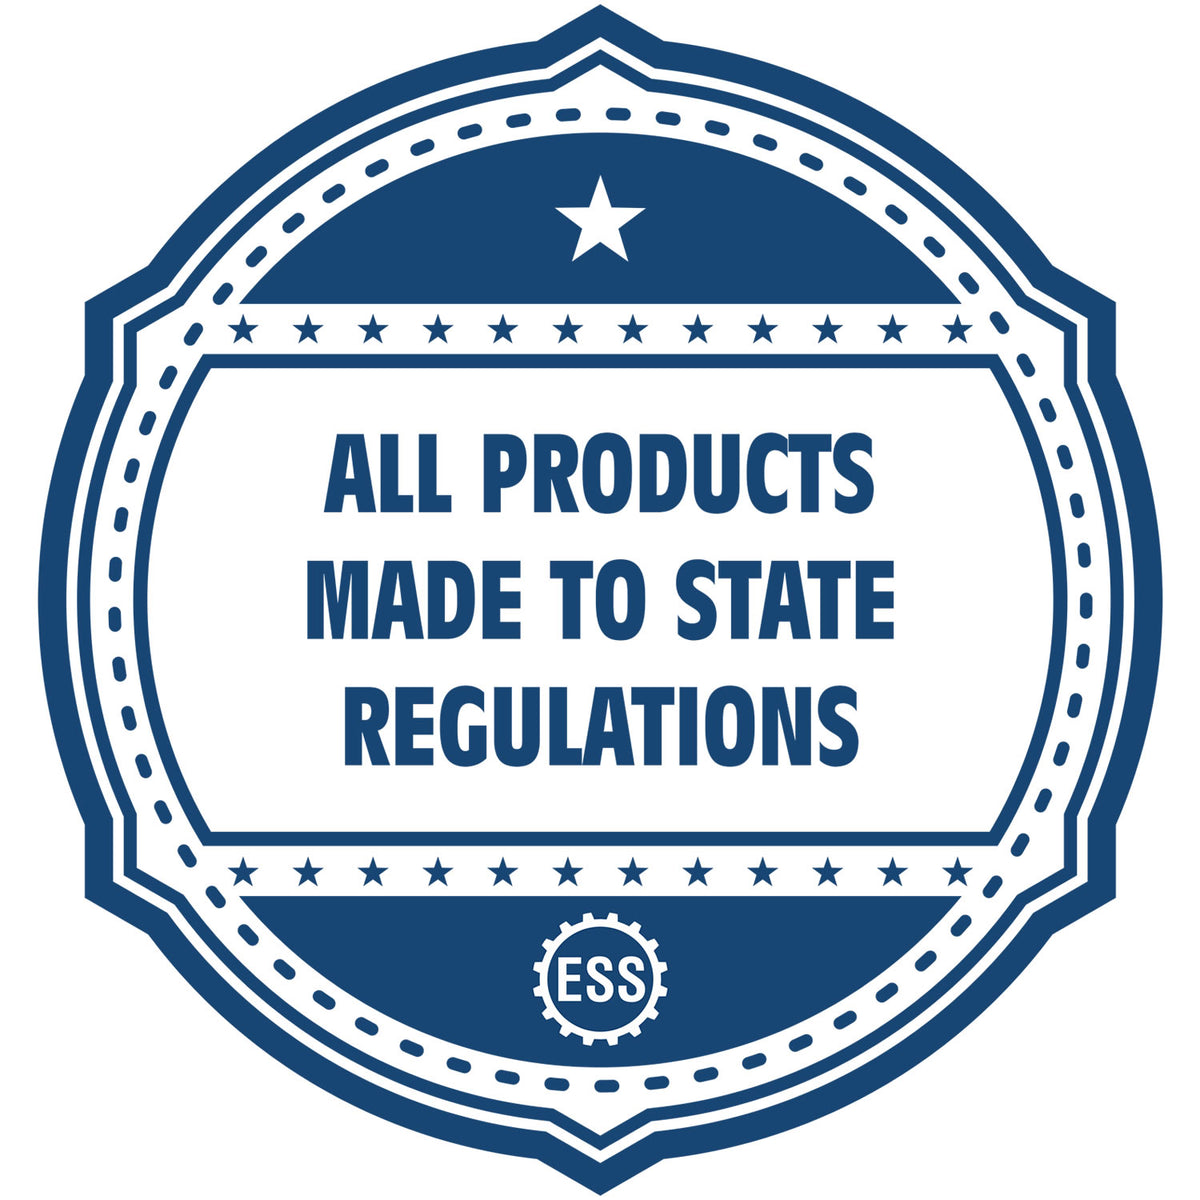 A blue icon or badge for the Gift Colorado Architect Seal showing that this product is made in compliance with state regulations.